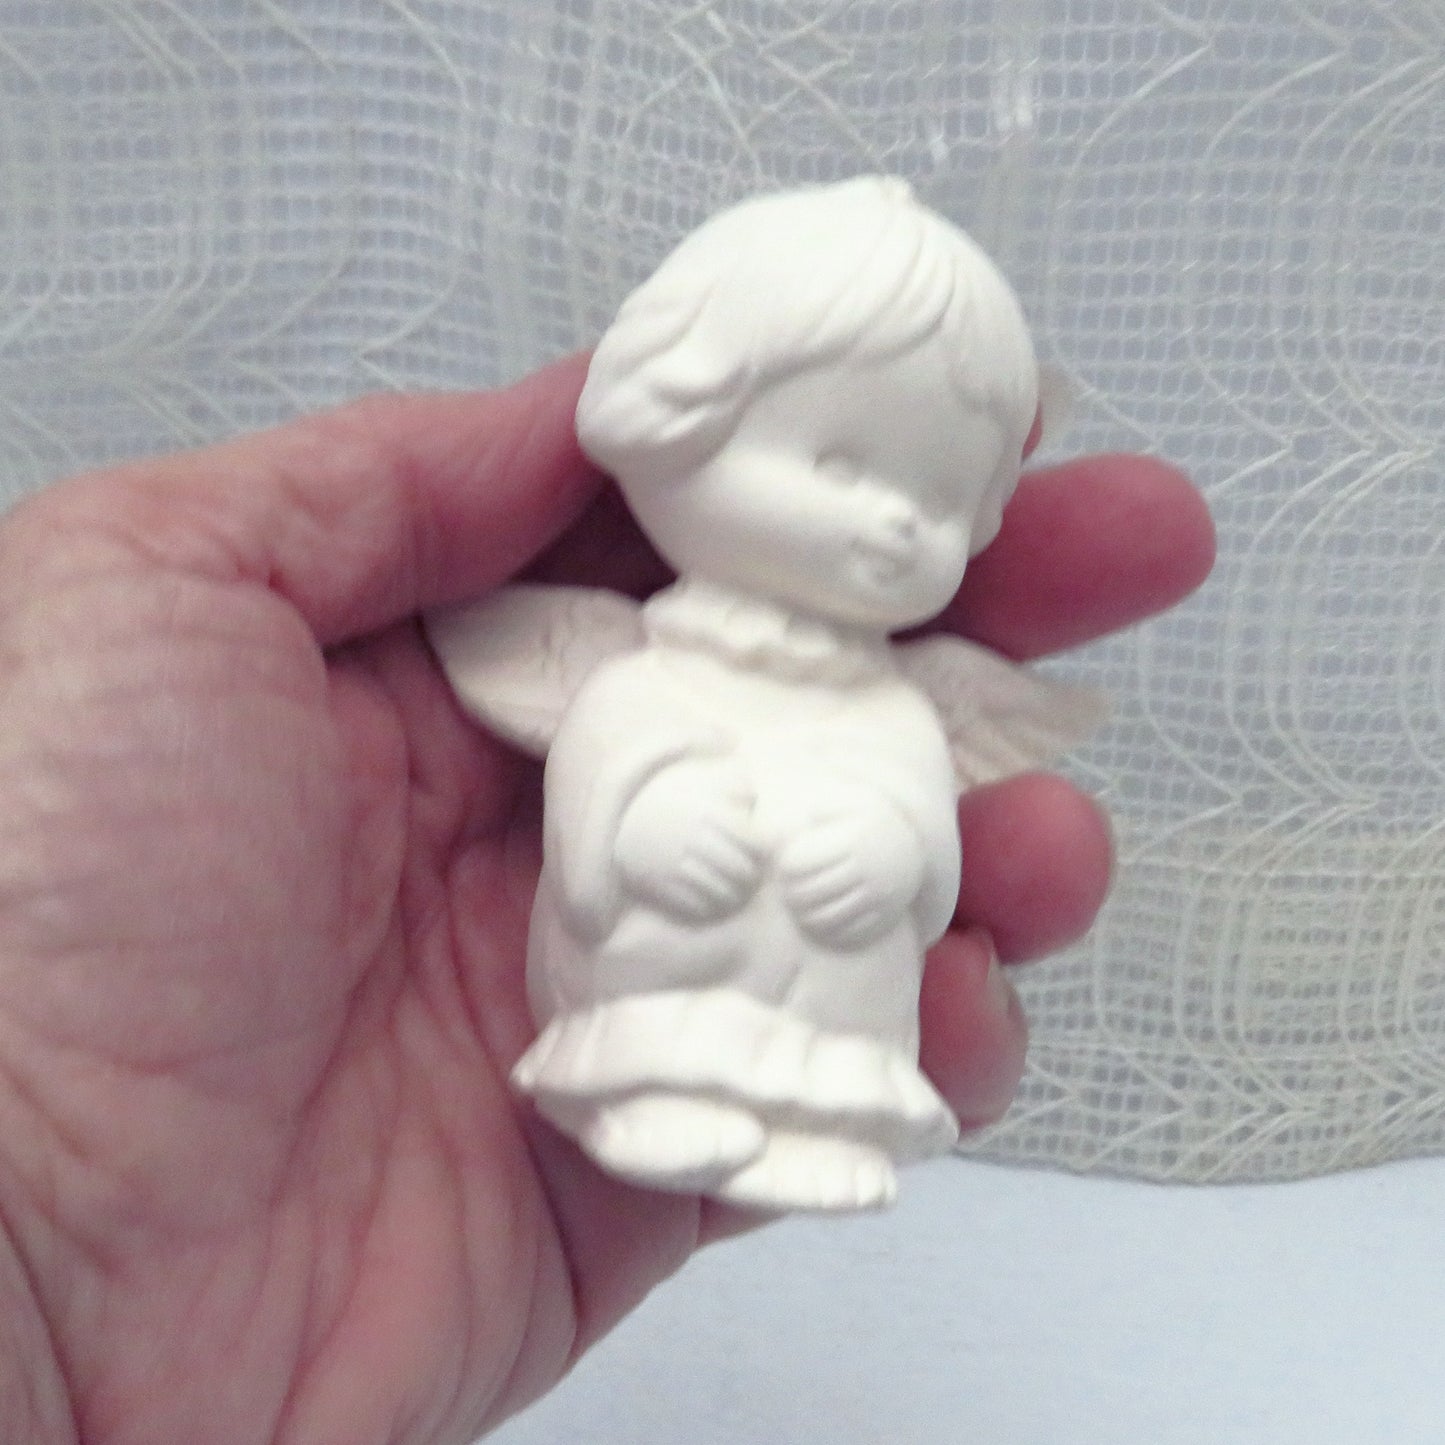 Unpainted bisque ceramic angel in my hand showing a size comparison.